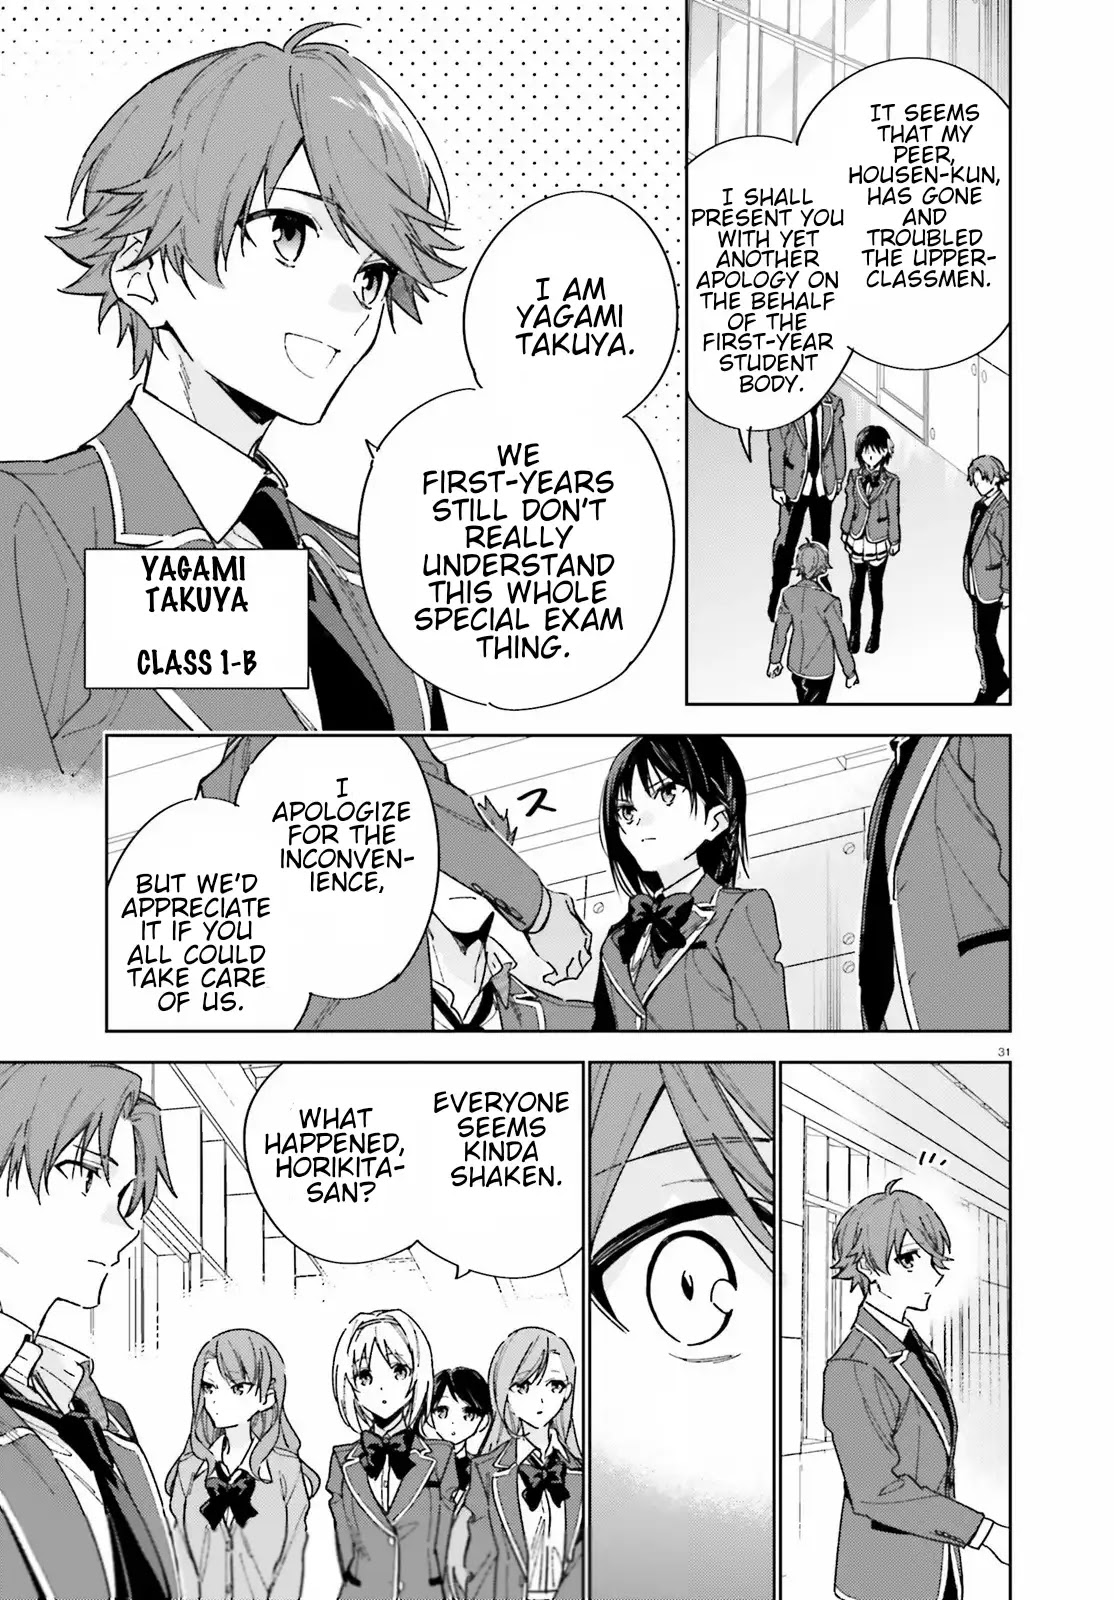 Classroom of the Elite – 2nd Year, Chapter 3 - Classroom of the Elite Manga  Online